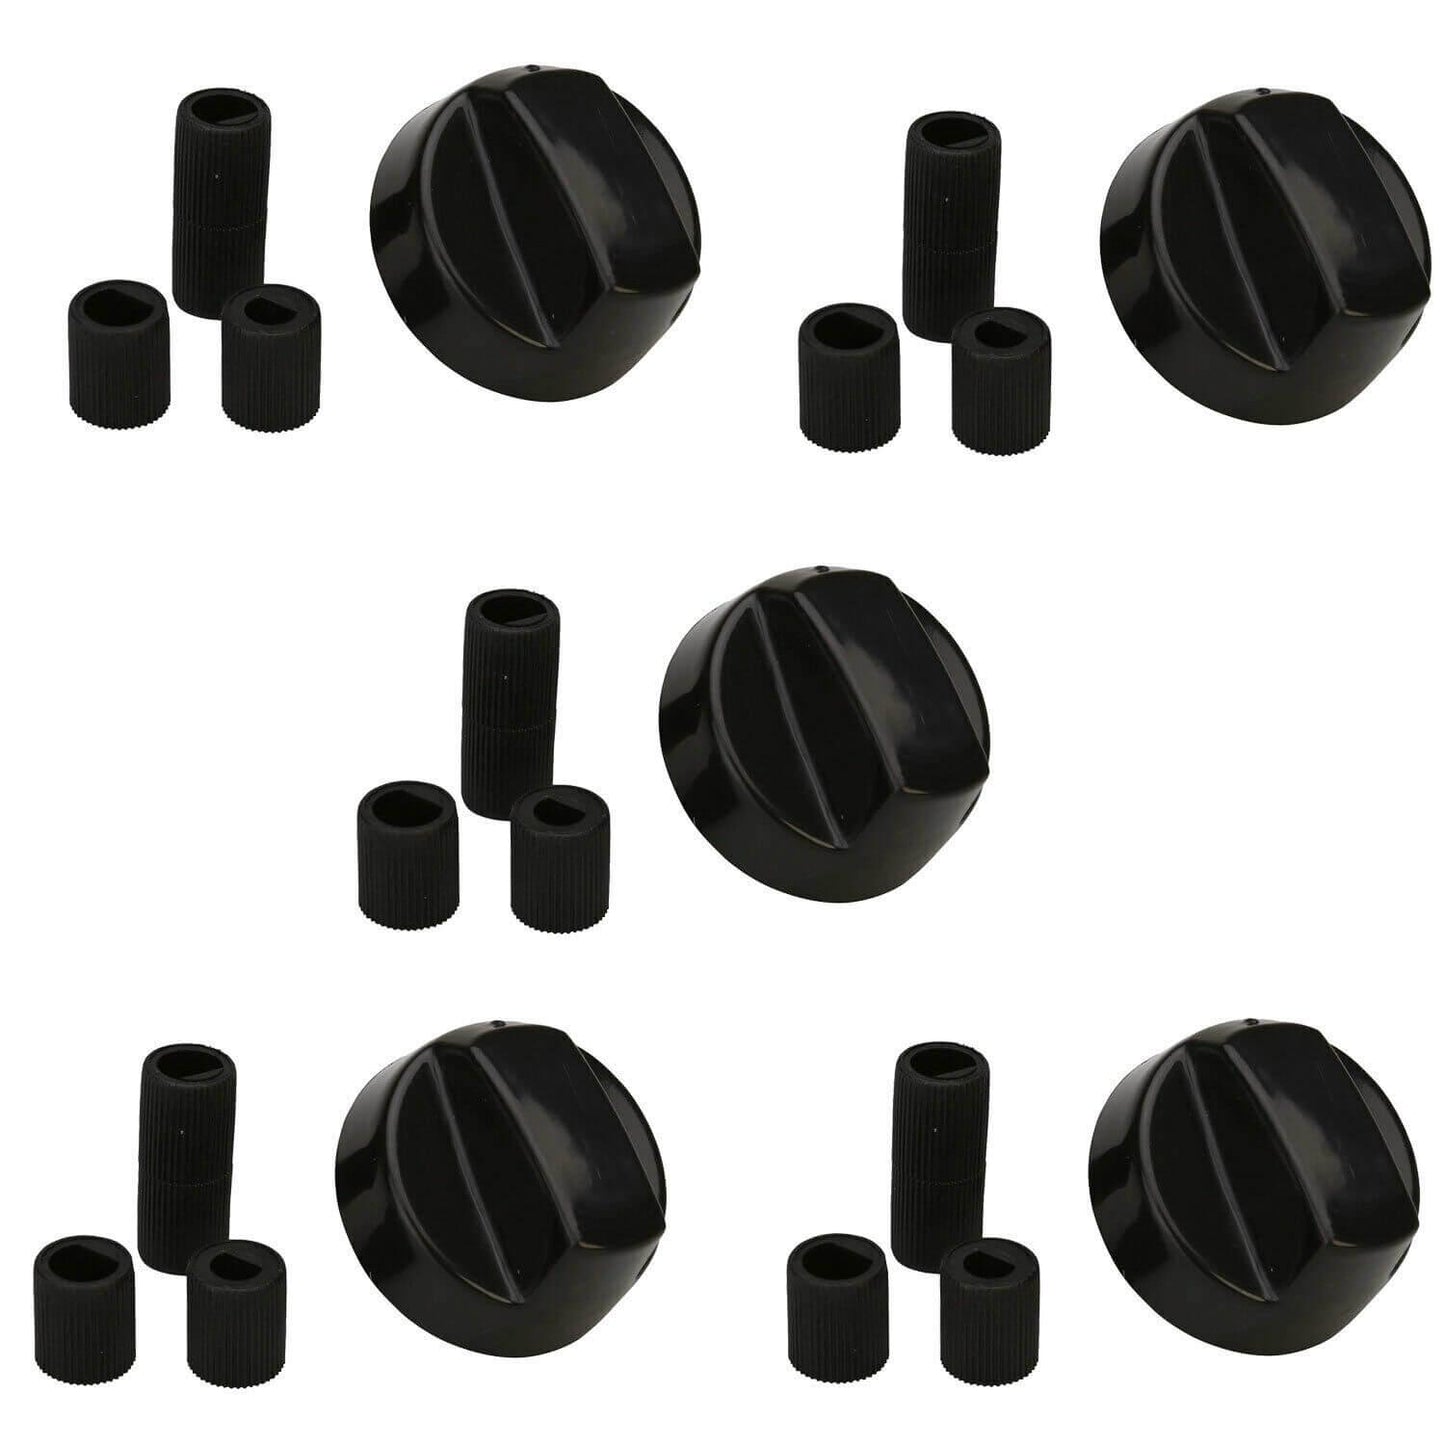 Universal Cooker Oven Stove Knobs Rotary Switch With 3 D Shaft Inserts Sparesbarn